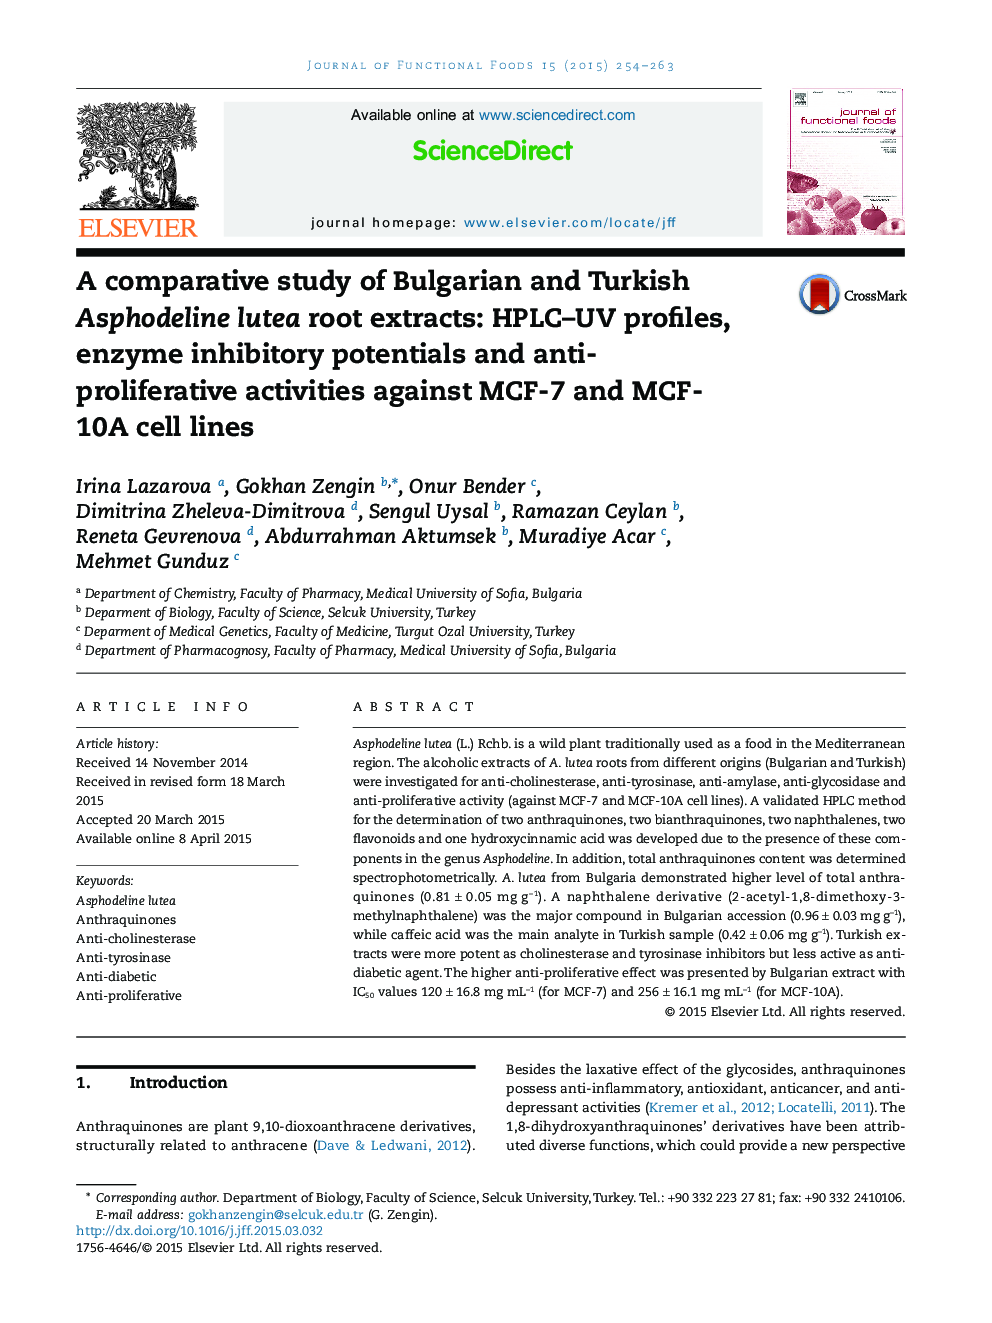 A comparative study of Bulgarian and Turkish Asphodeline lutea root extracts: HPLC–UV profiles, enzyme inhibitory potentials and anti-proliferative activities against MCF-7 and MCF-10A cell lines